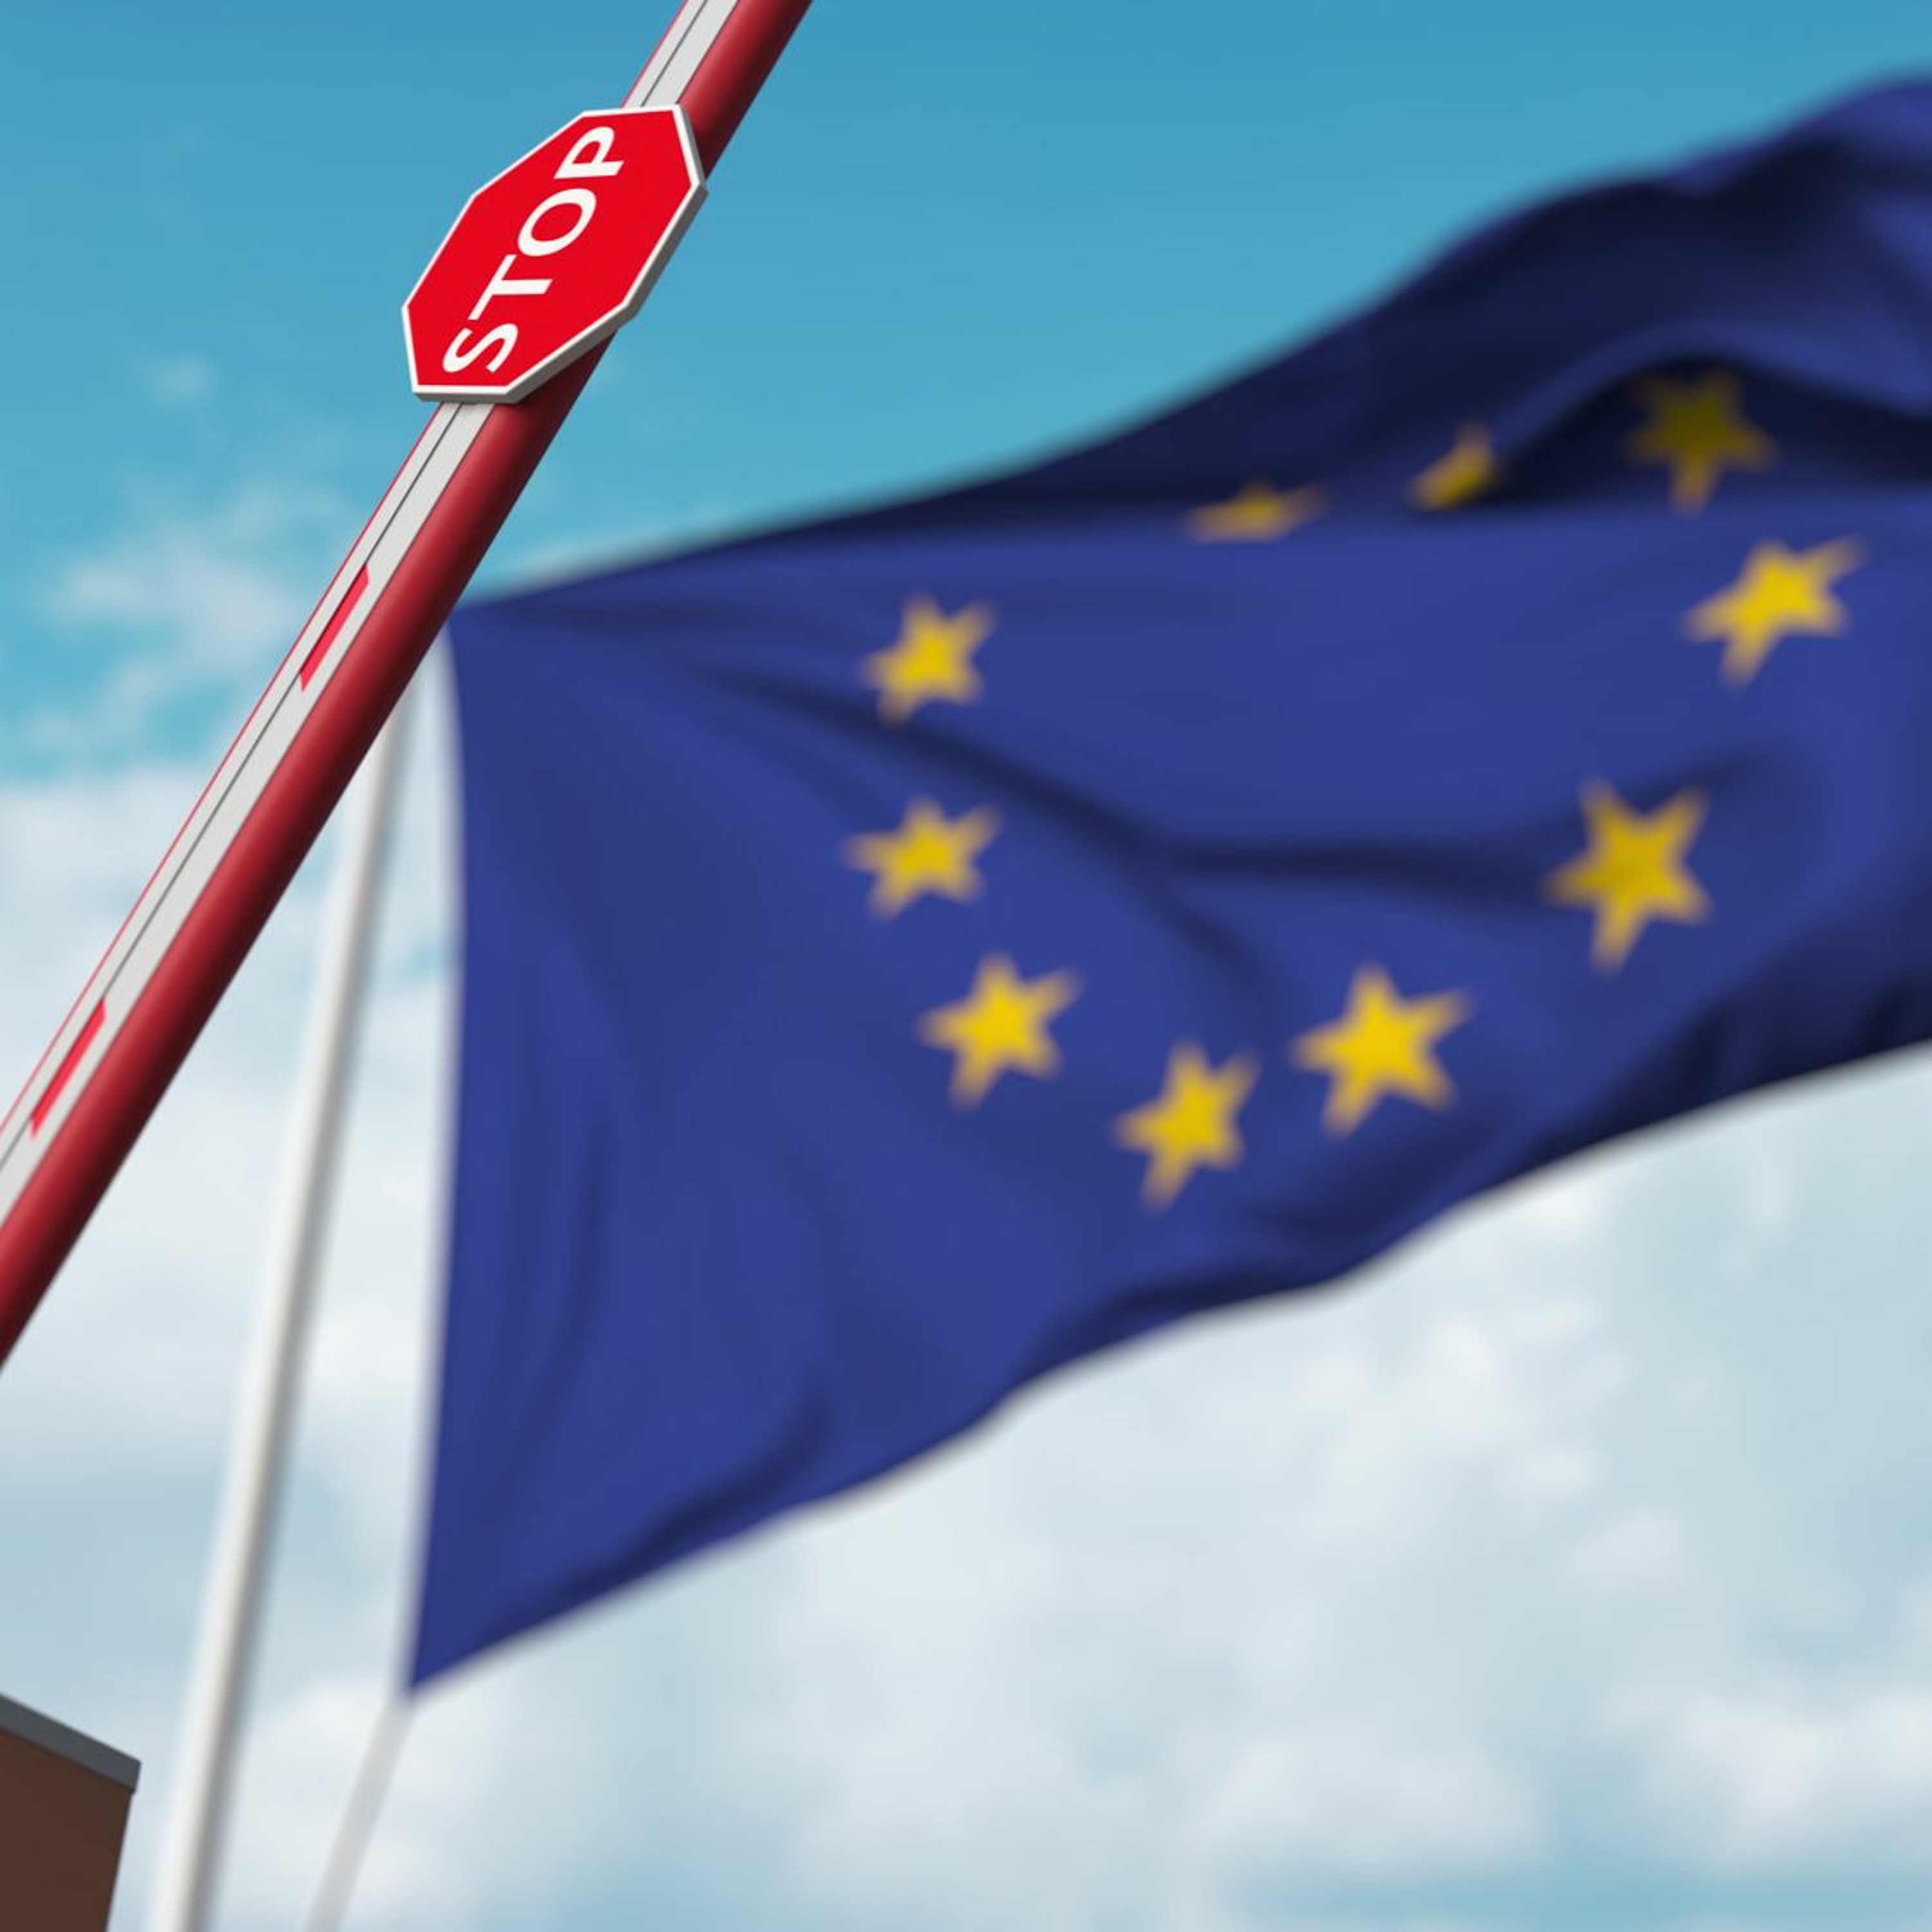 CER Podcast: Is the EU ready for enlargement?